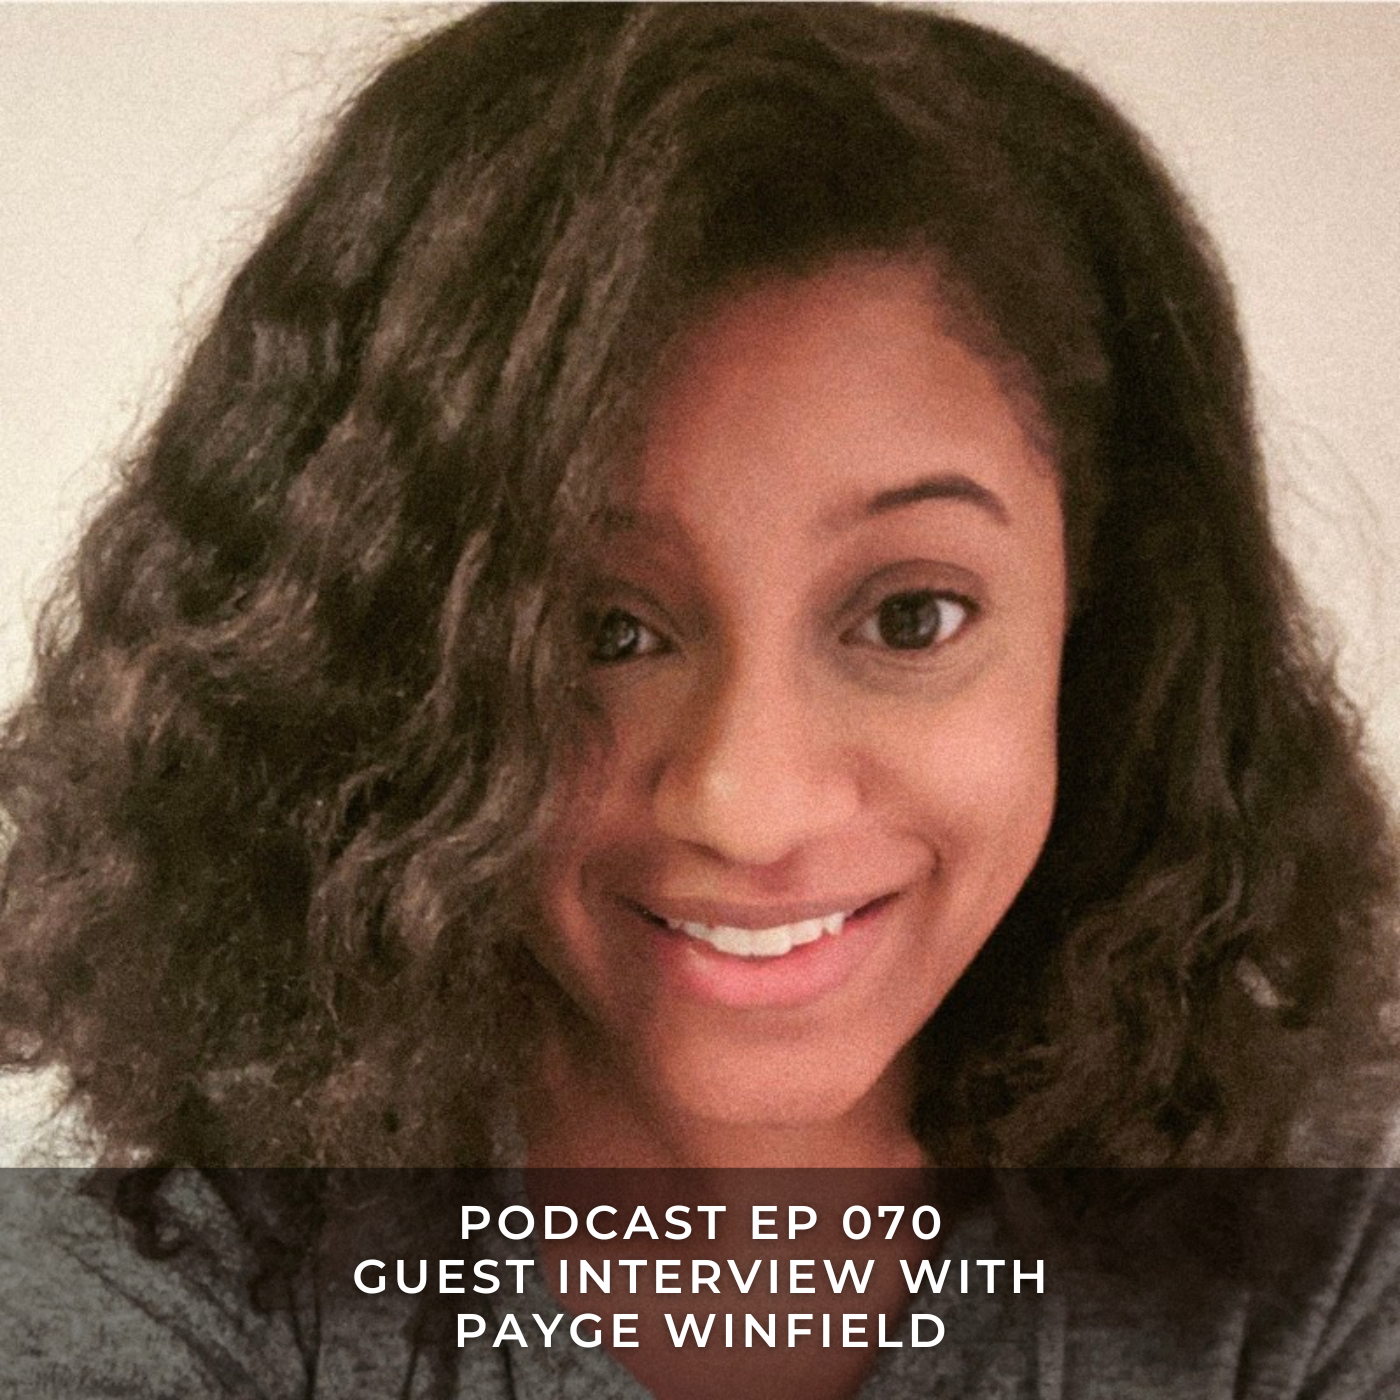 Guest Interview with Payge Winfield